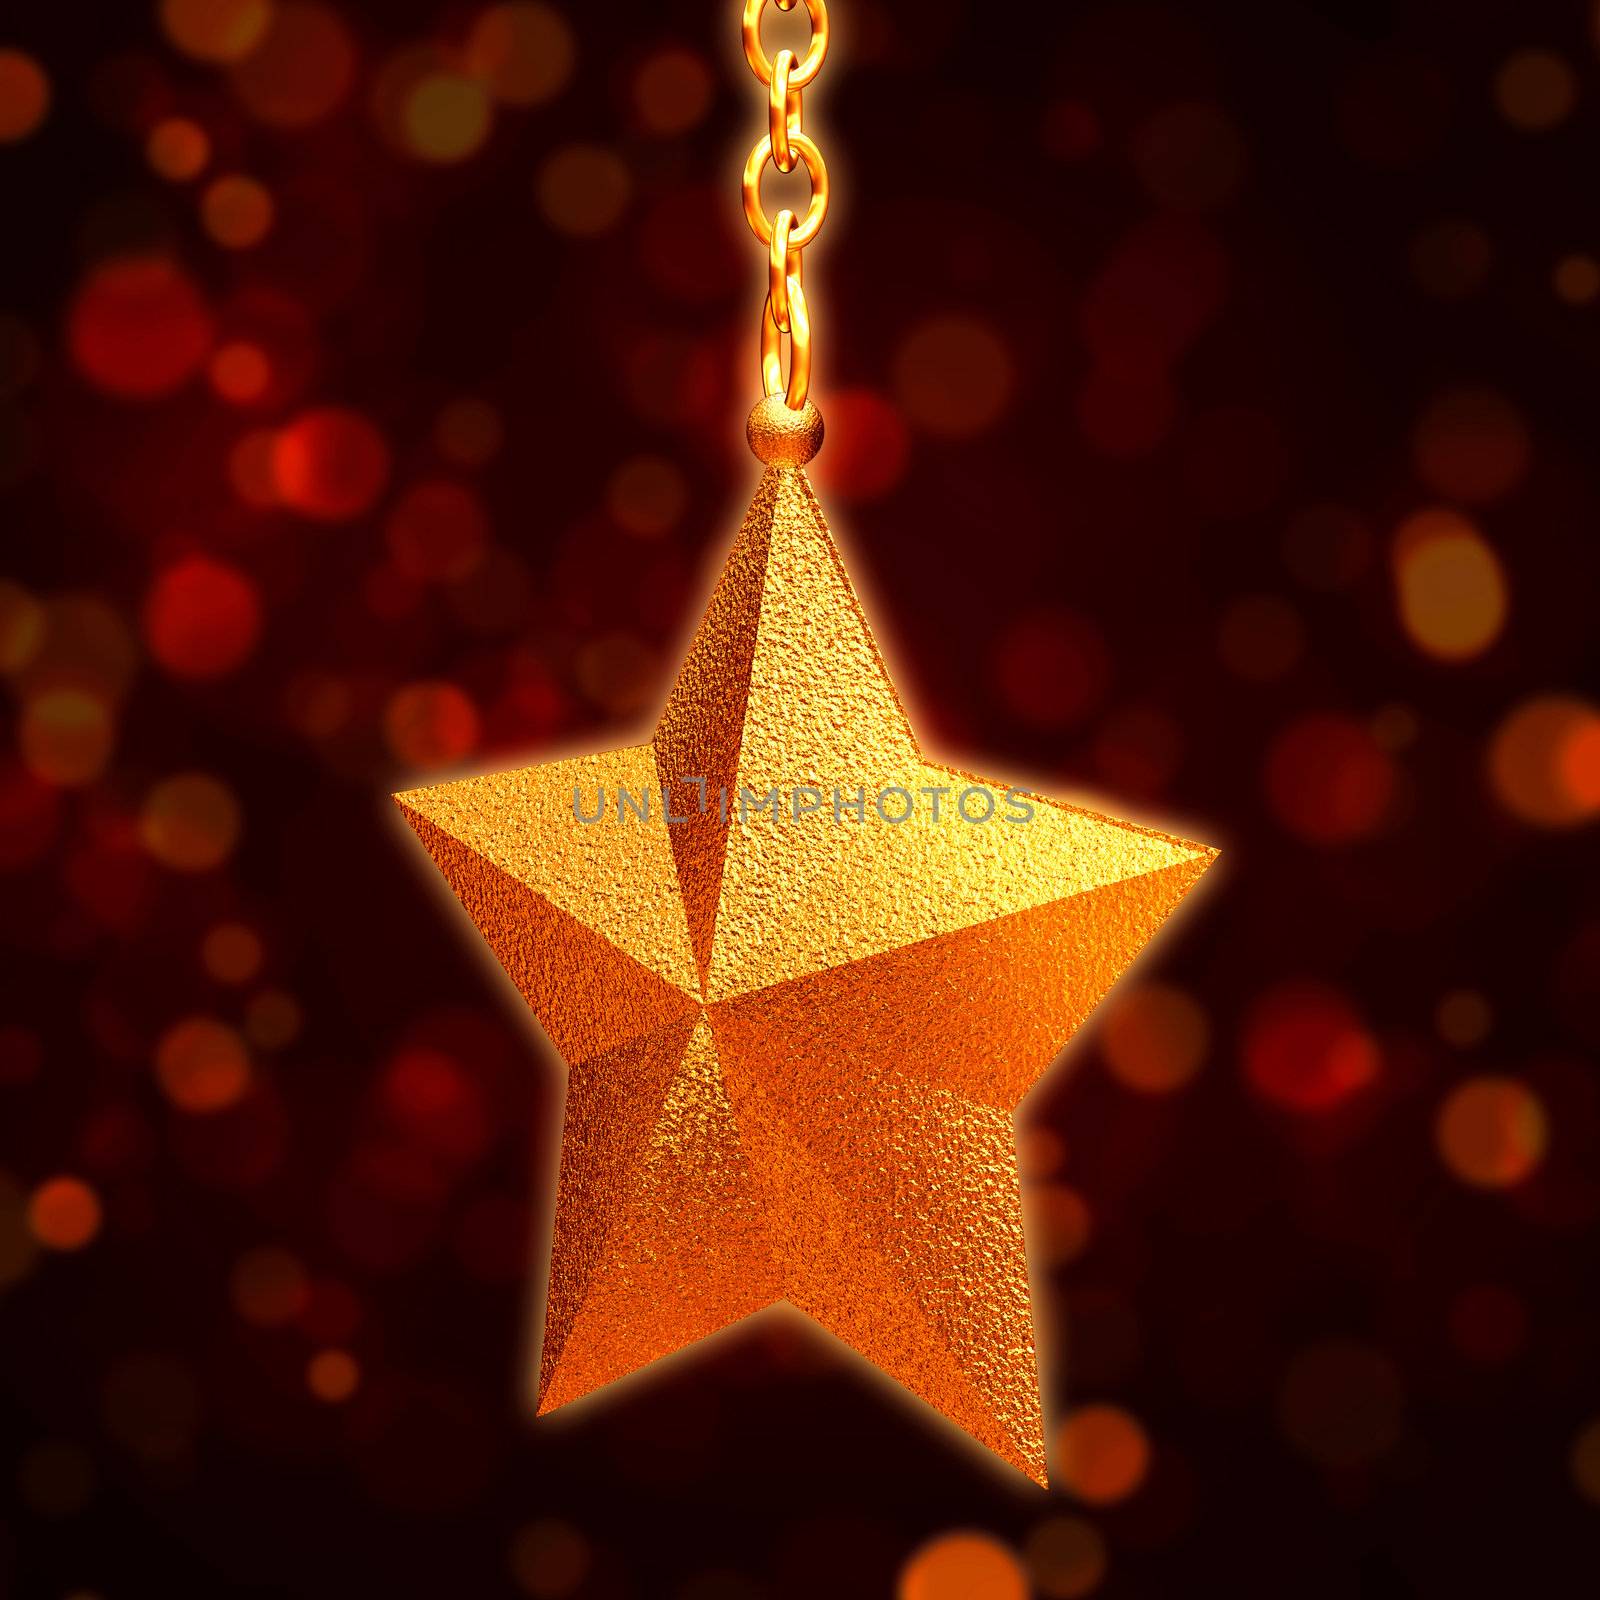 3d golden star with chains by marinini